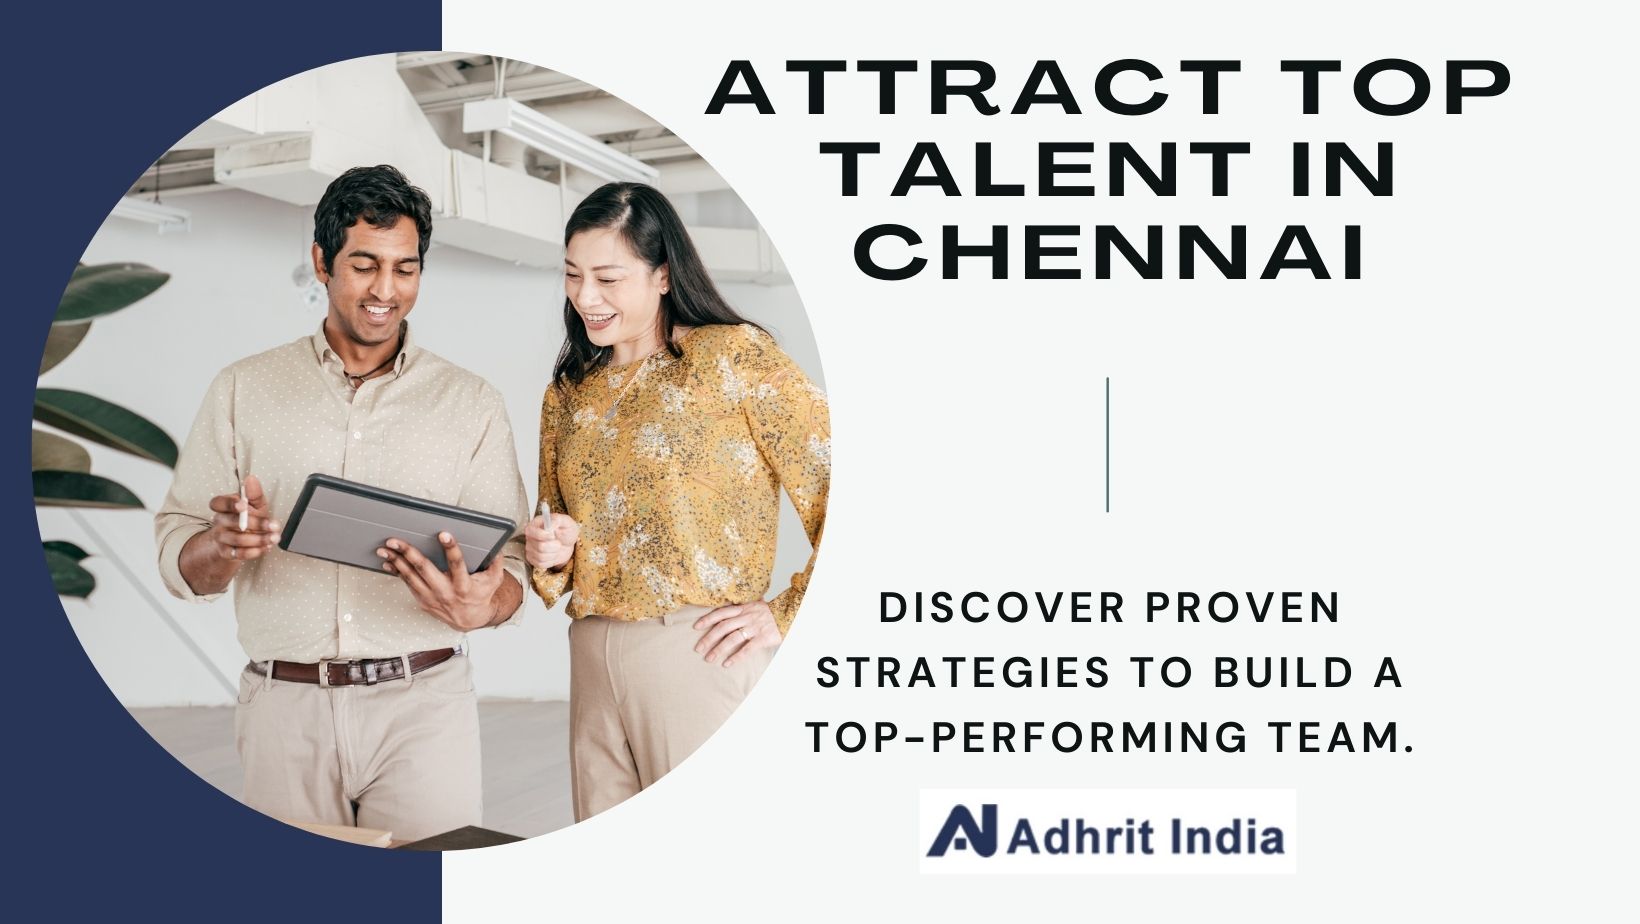 Strategies for Recruiting Top Talent in Chennai